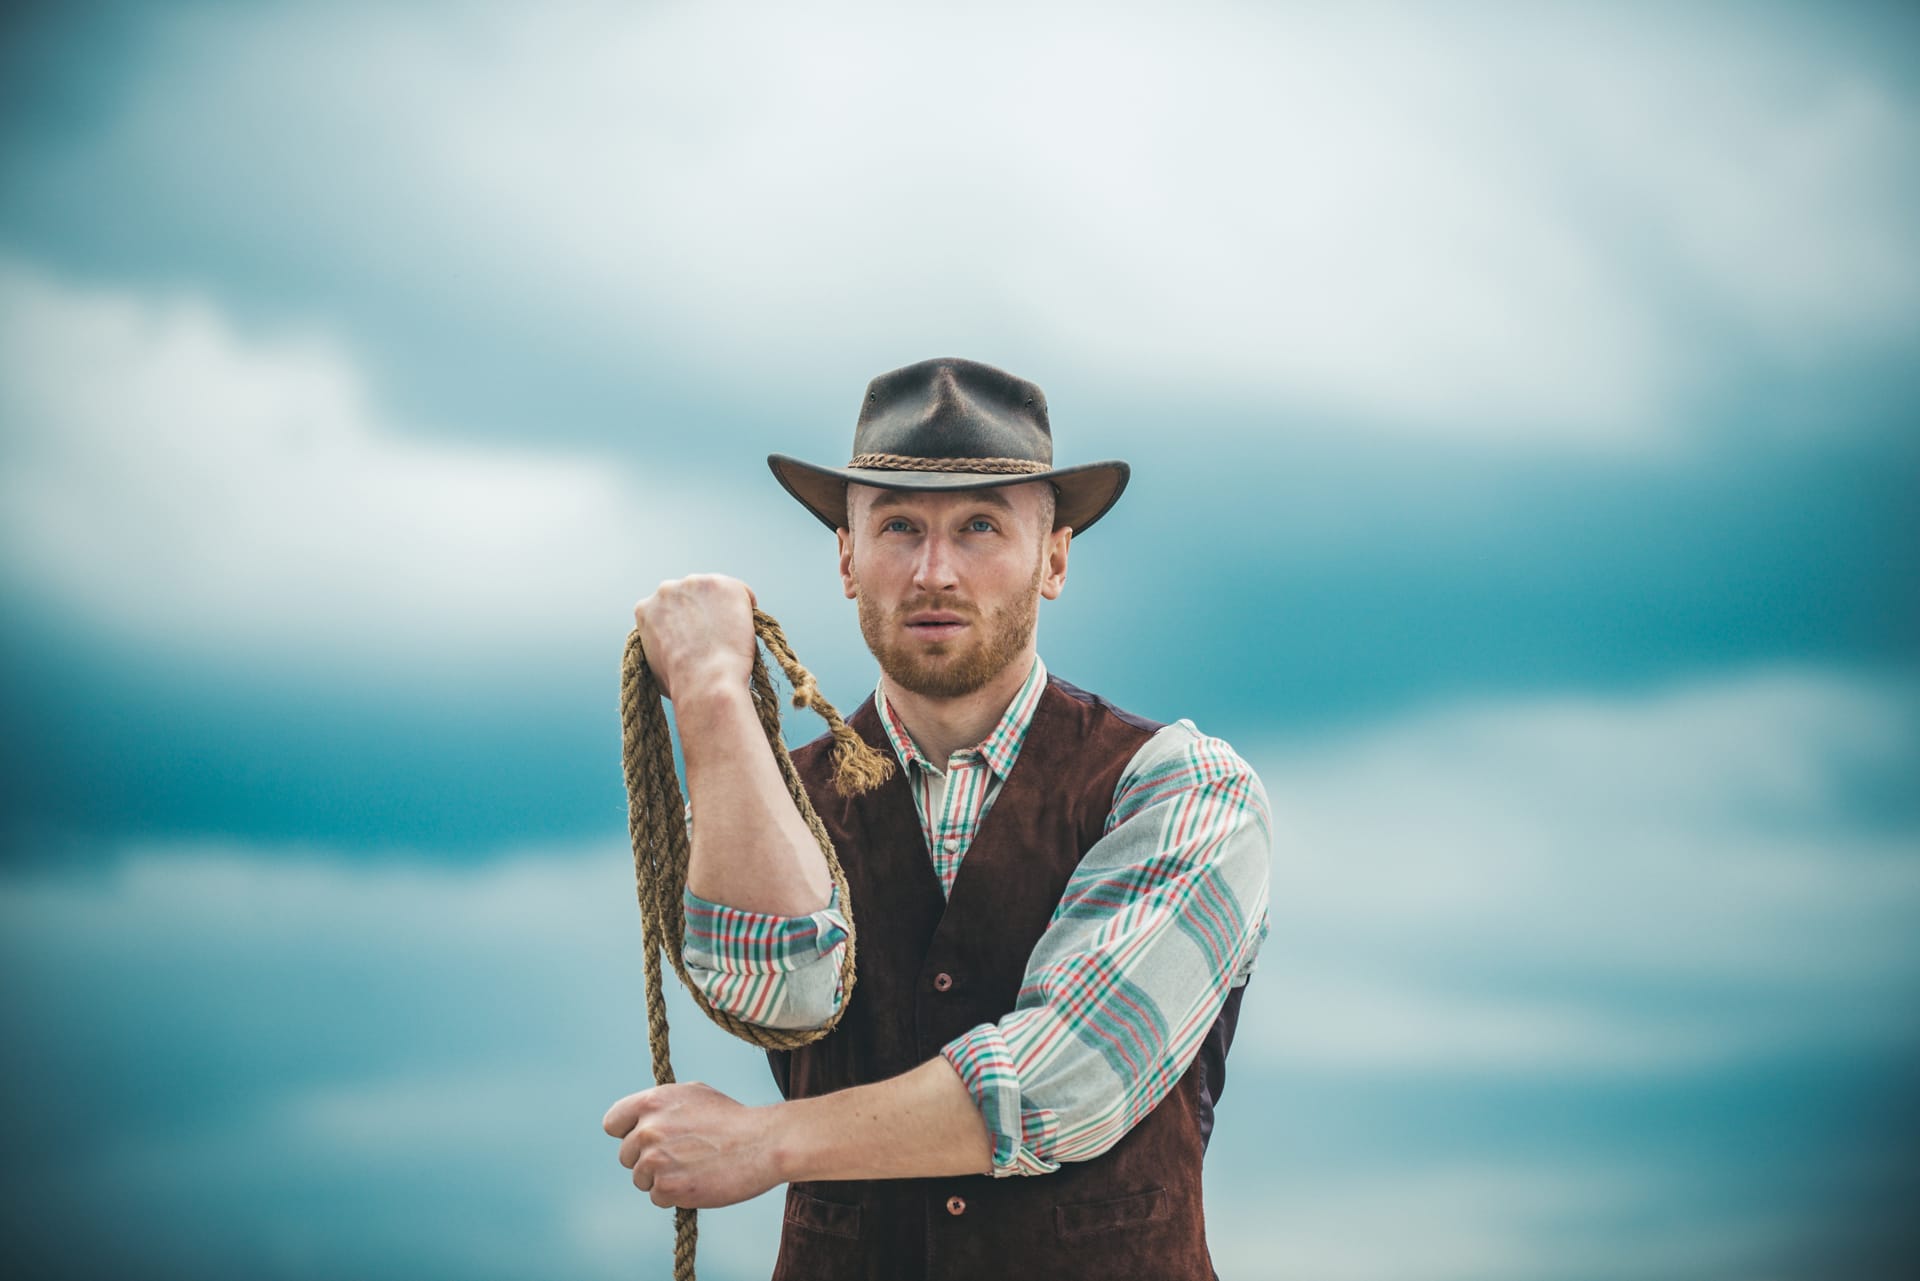 Western man with cowboy hat cowboy with lasso rope sky background